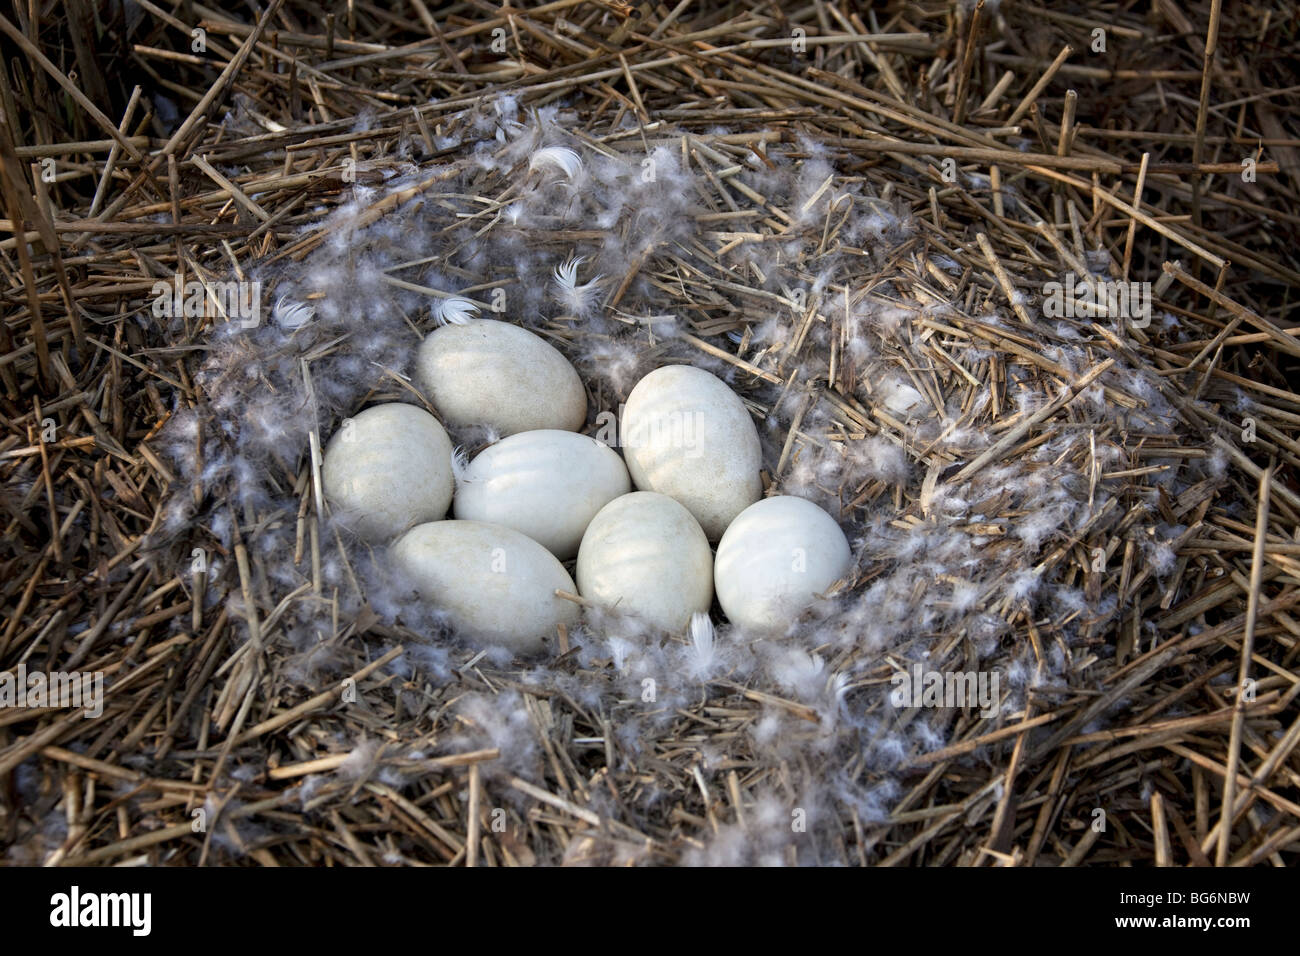 Greylag Goose / Graylag Goose (Anser anser) nest with clutch of eggs in reed bed Stock Photo